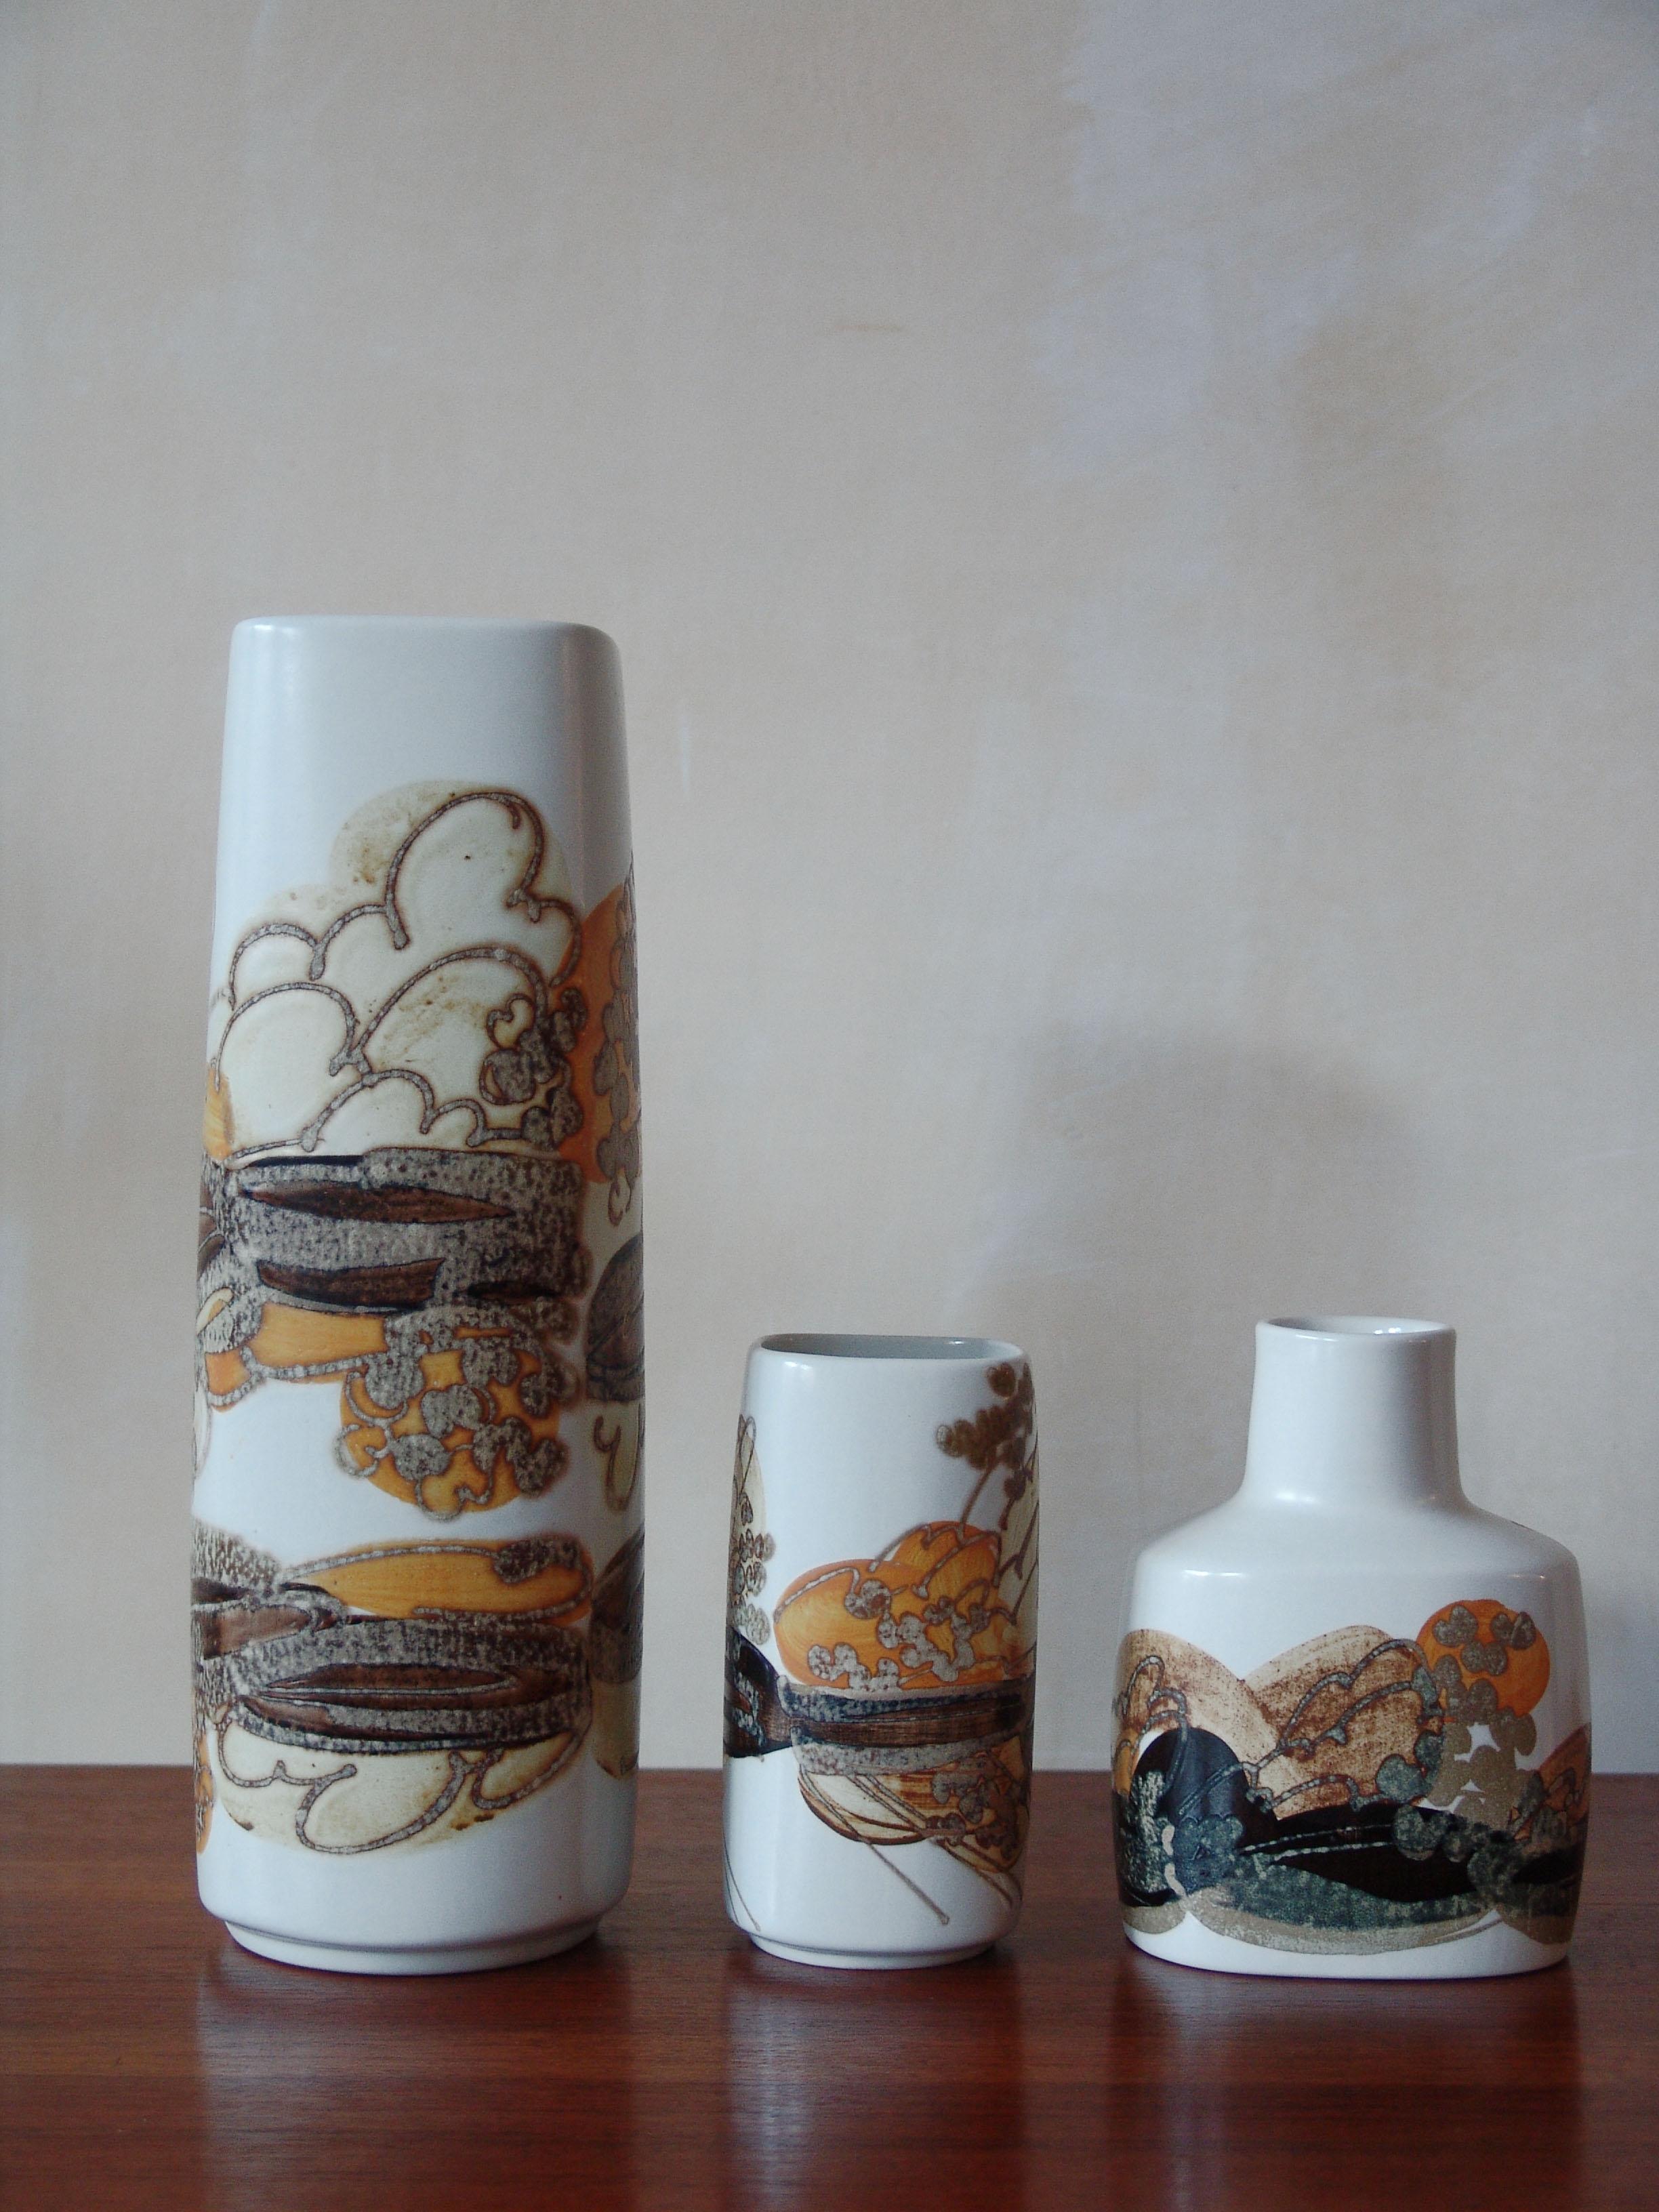 Set of Scandinavian Mid-Century Modern ceramic vases designed by Ivan Weiss for Royal Copenhagen with the manufacturer's signature on the bottom, circa 1960s.
Marked under the bases

Please note that the set is original of the period and this